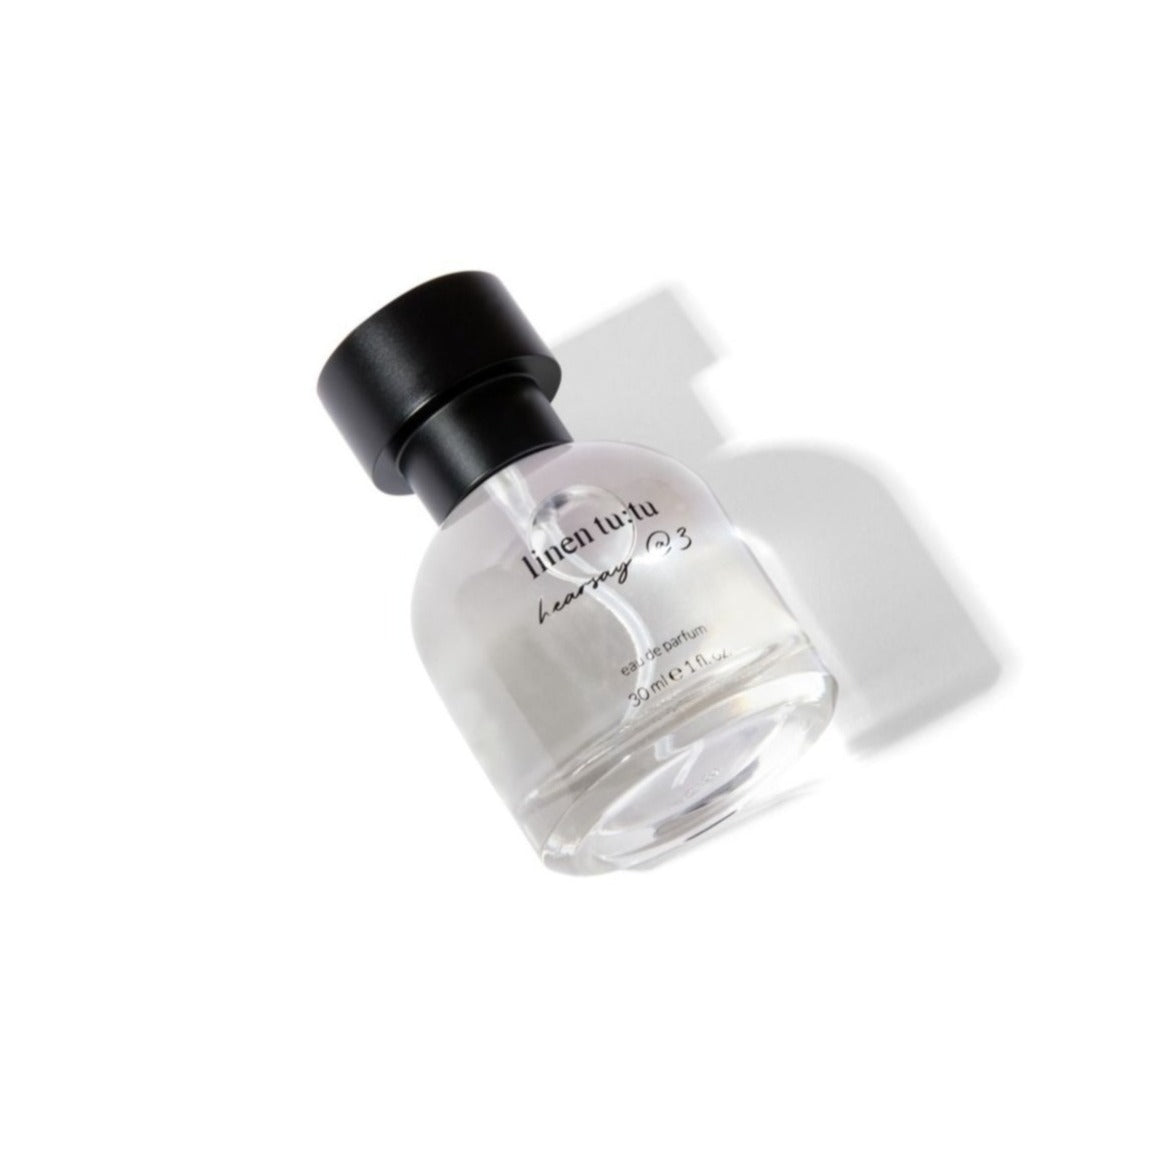 Linen Tutu Hearsay at Three 30 ml fragrance at an angle on a white background